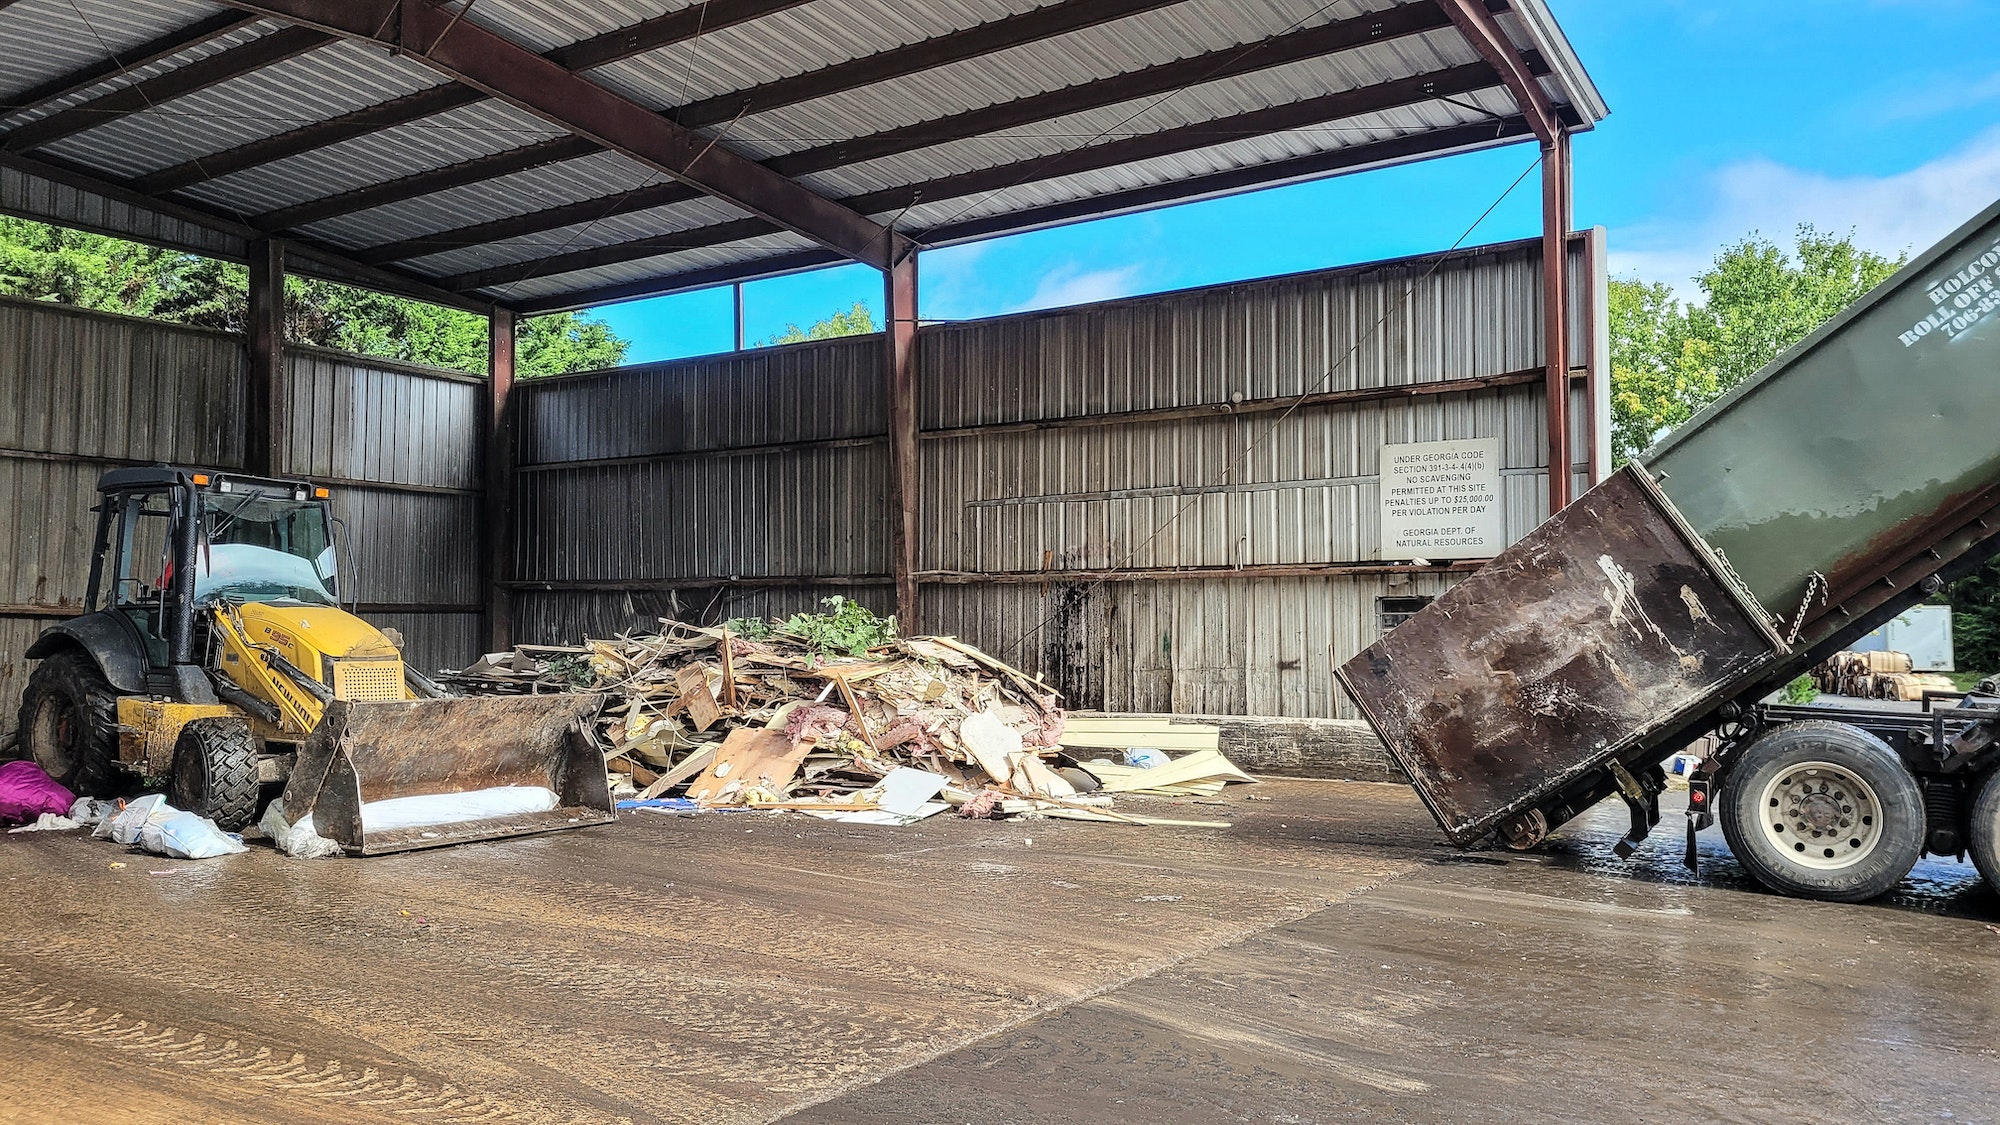 Dump truck has dumped Trash in shed and bulldozer will move it for disposal.